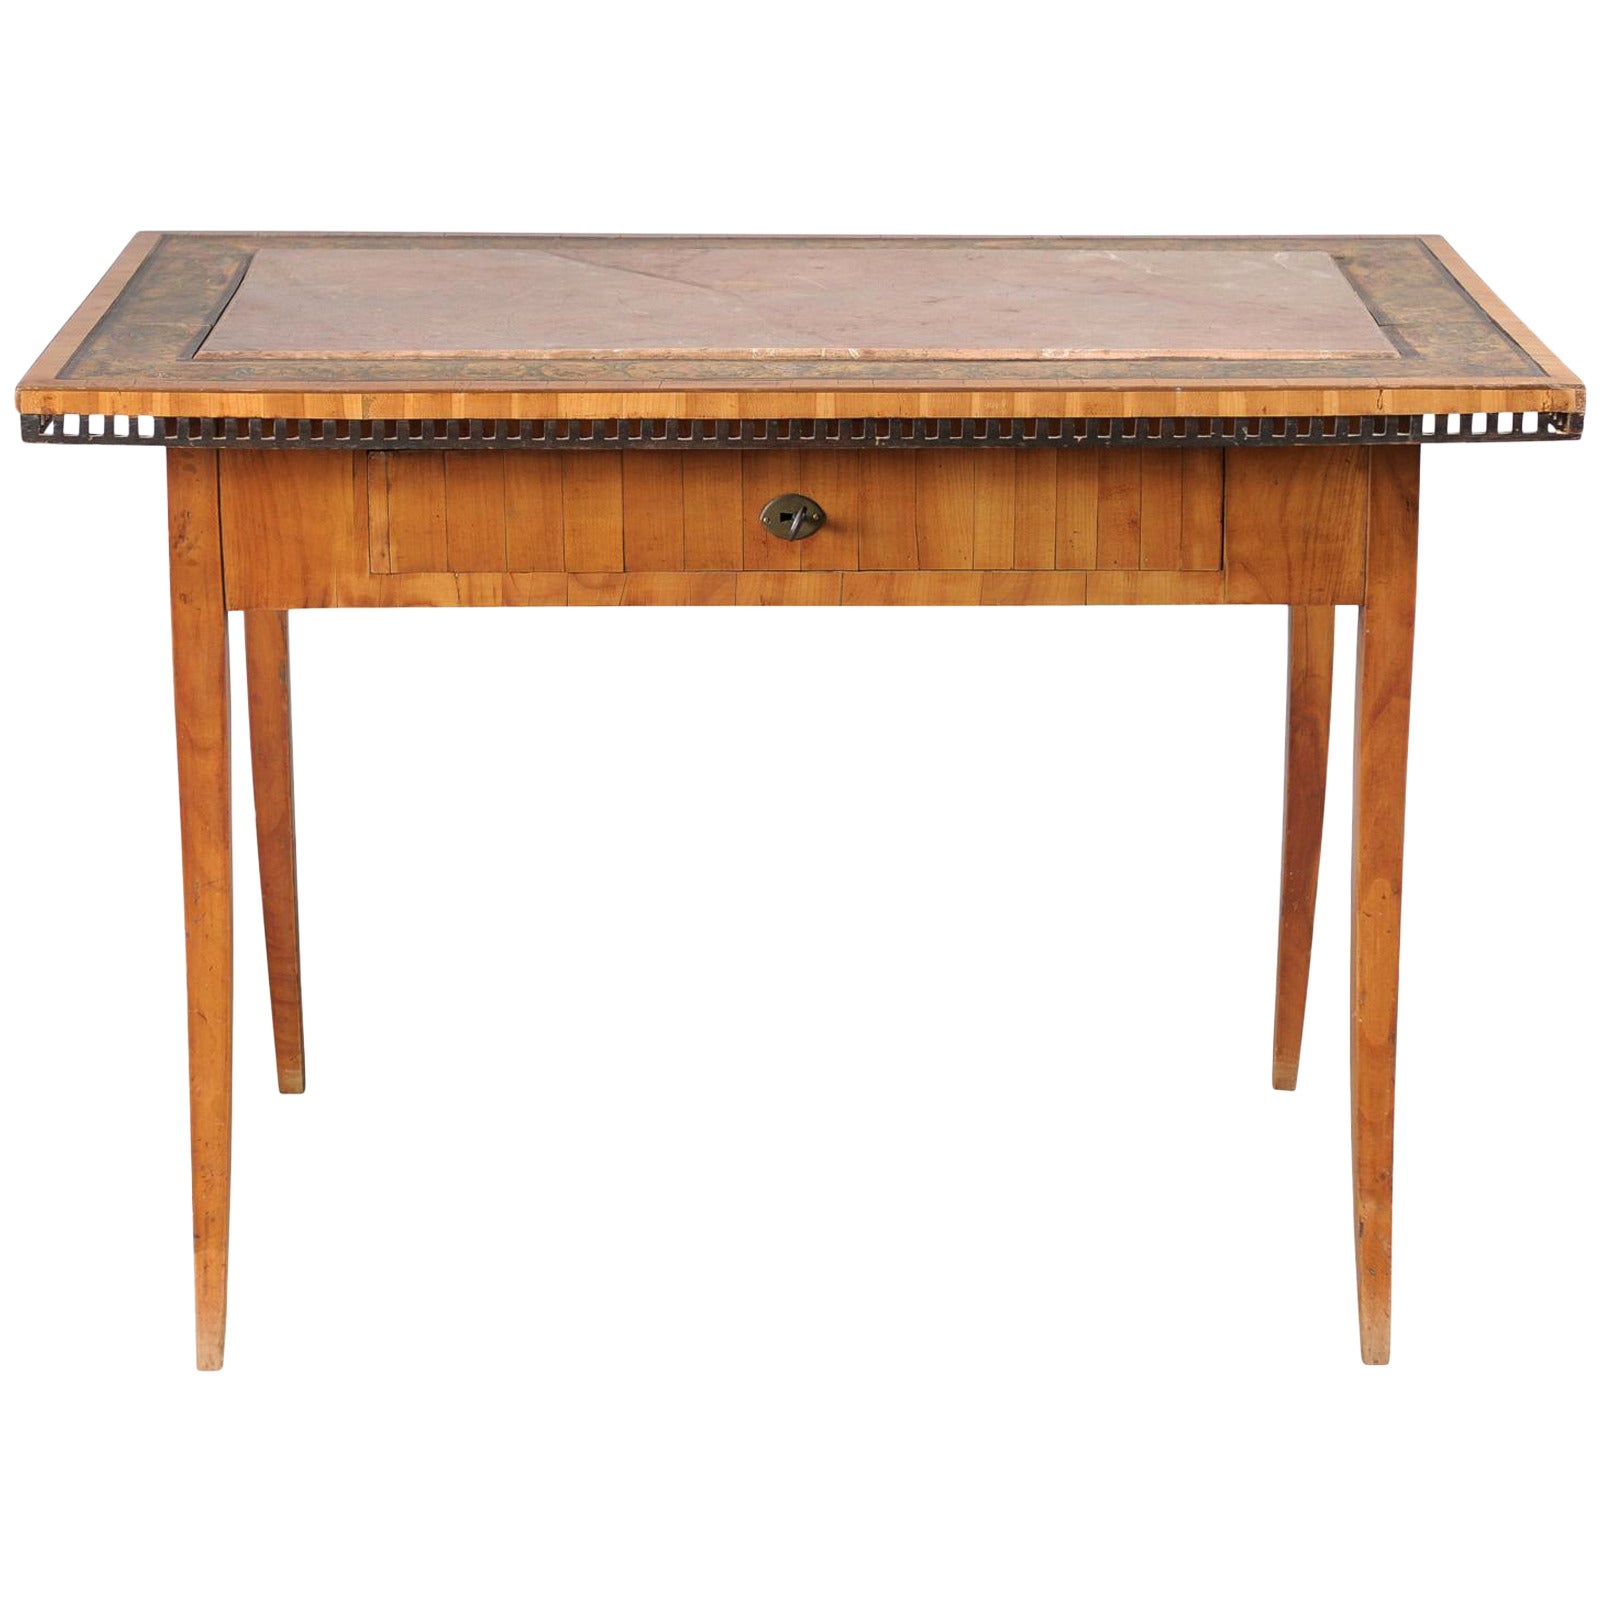 Austrian Table/Writing Desk with Inset Stone Top and Painted Border, circa 1810 For Sale